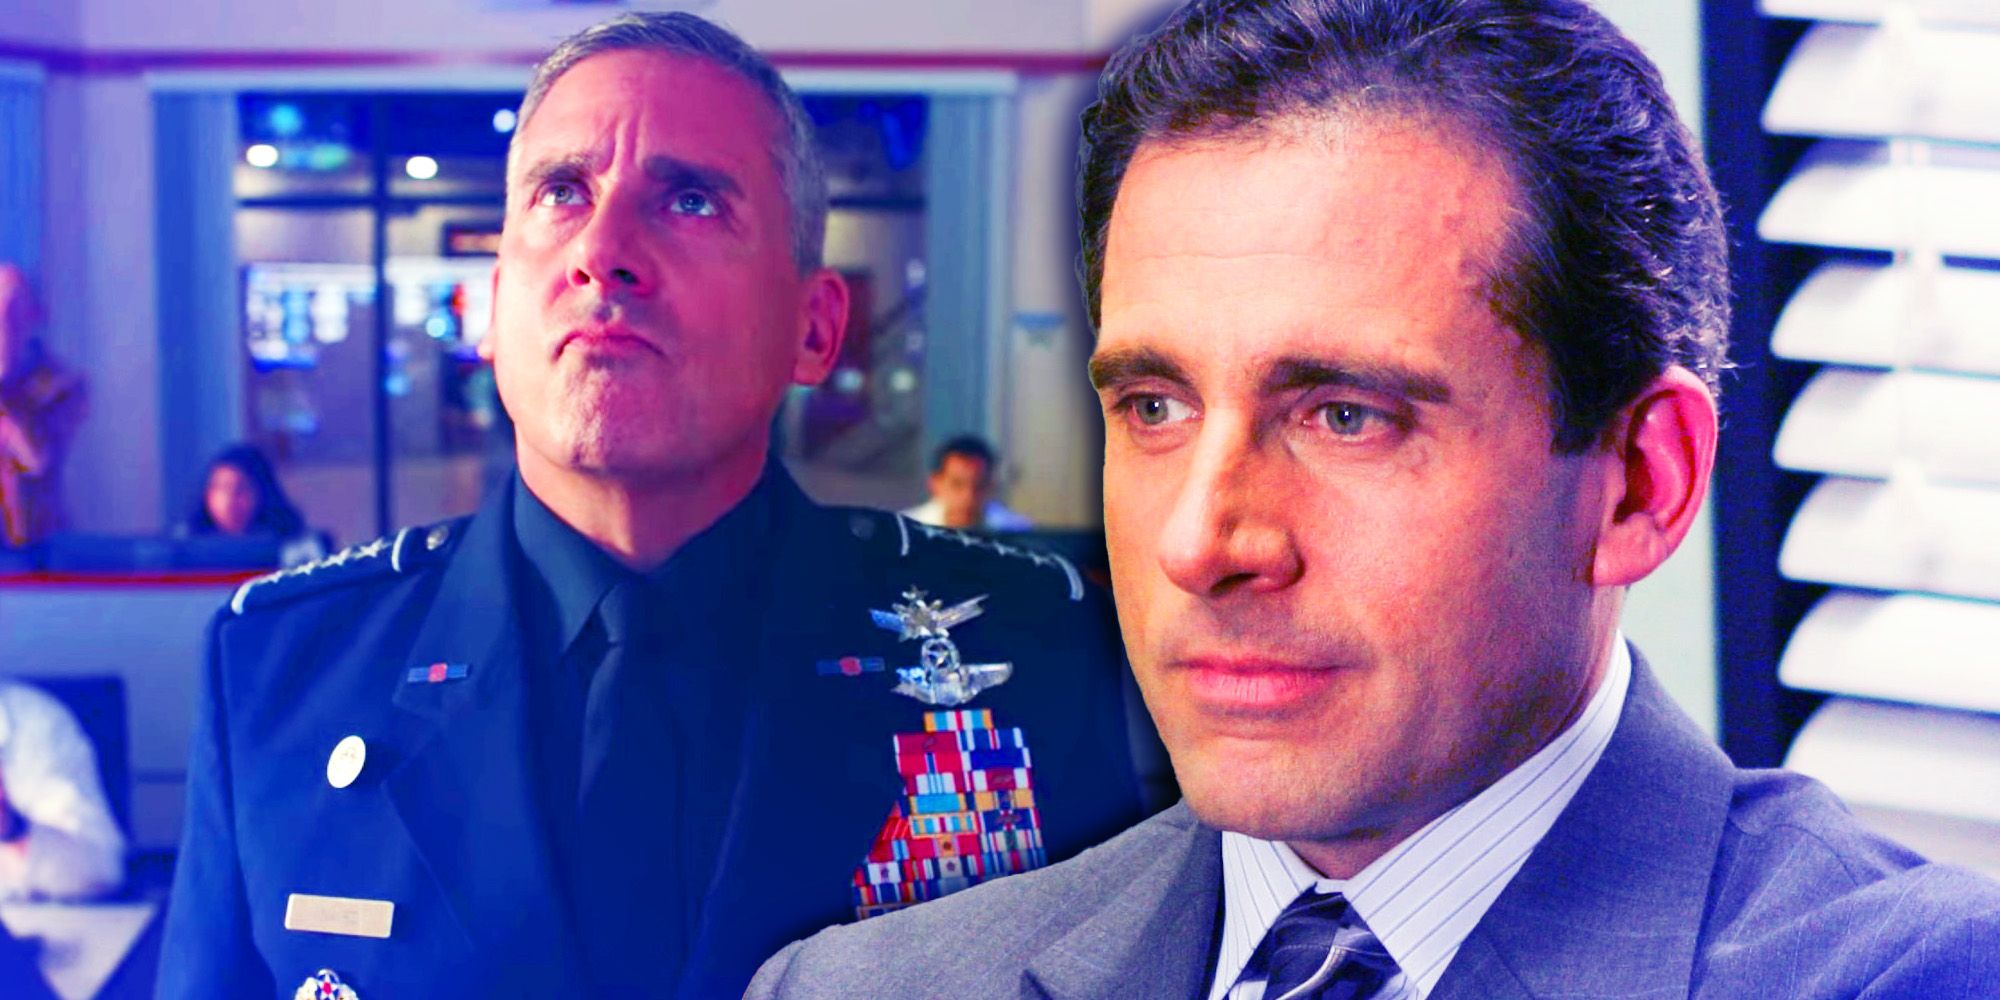 Steve Carell in Space Force and The Office